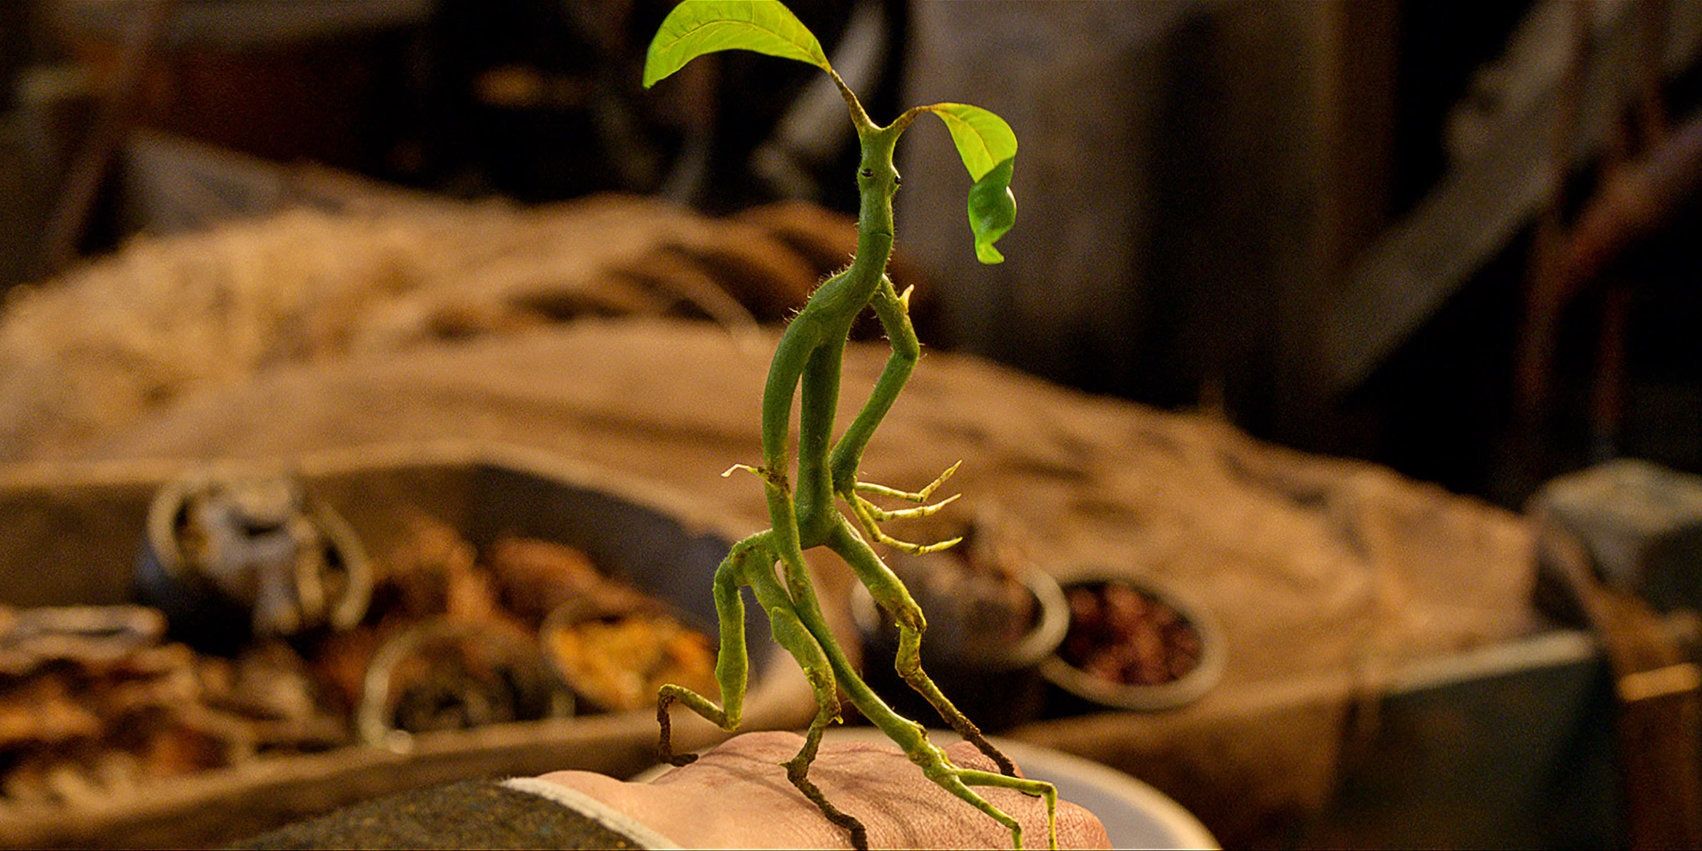 A Bowtruckle in Fantastic Beasts